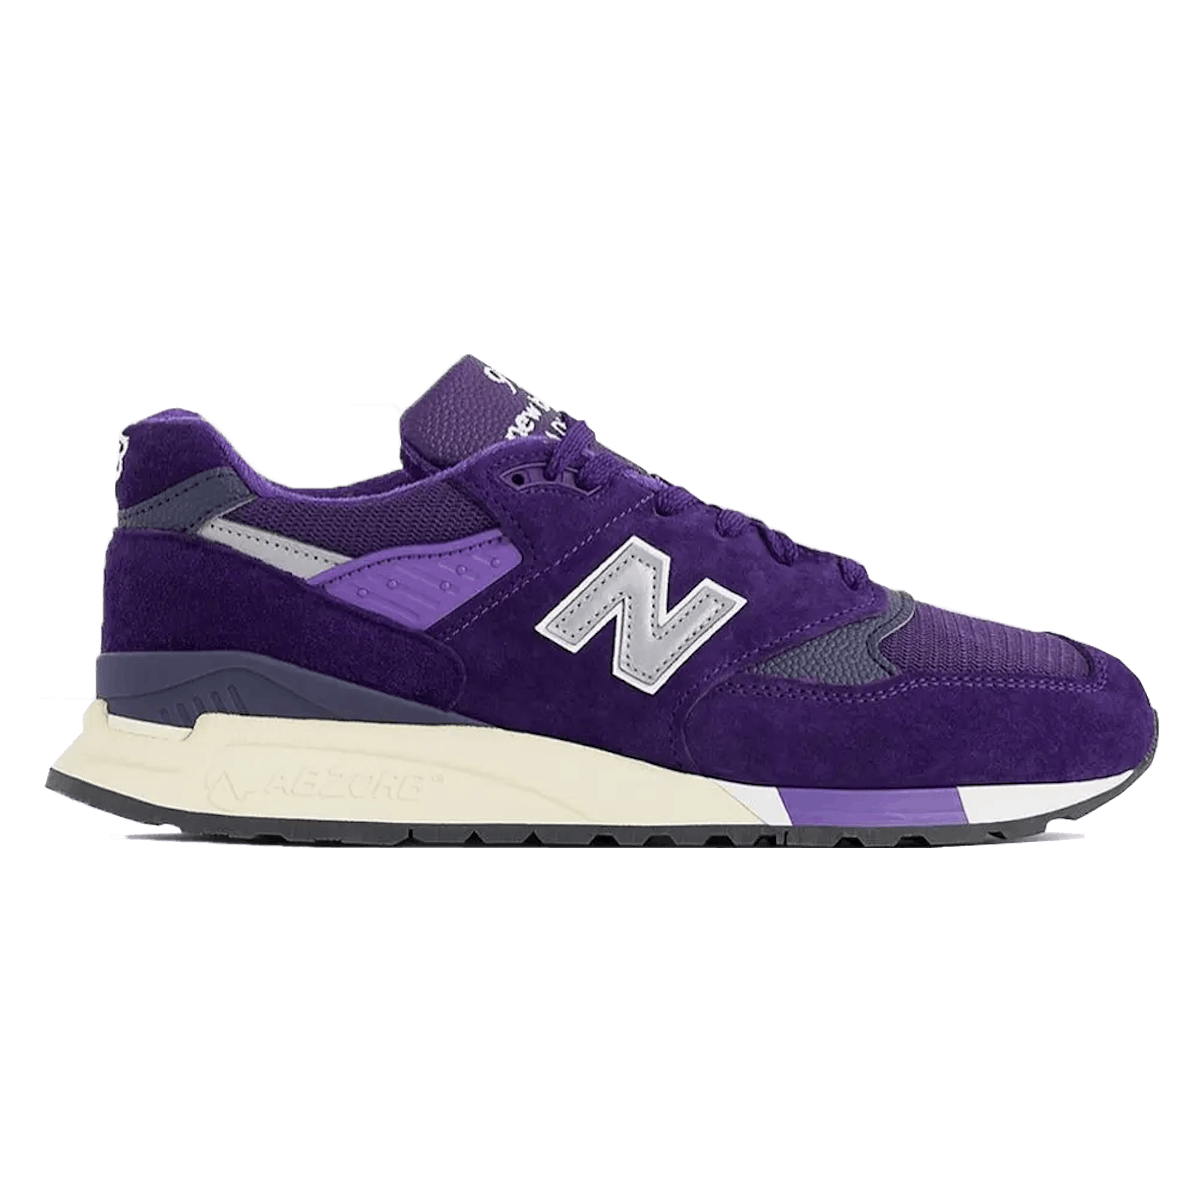 New Balance 998 Made in USA "Plum Silver"